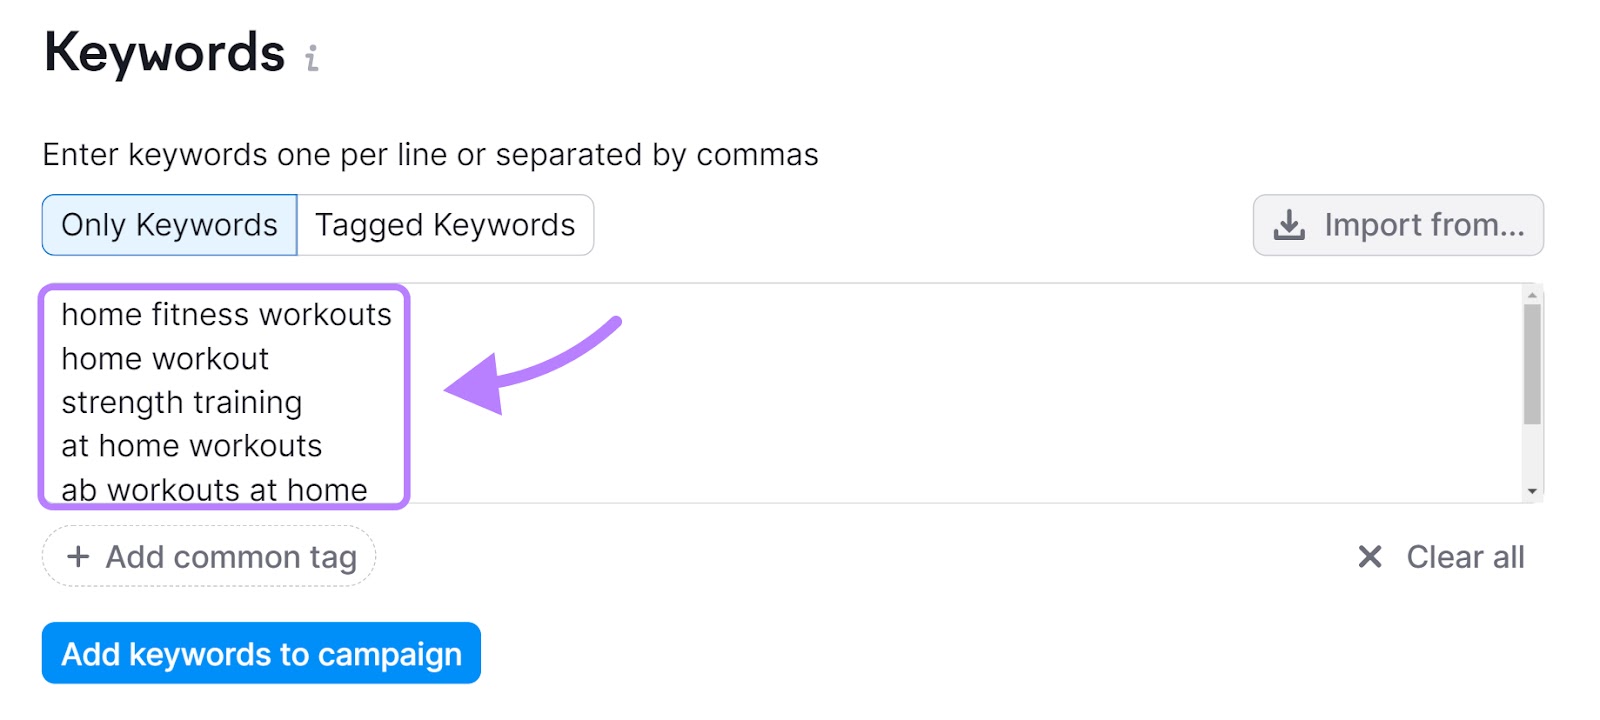 "Keywords" window in Position Tracking settings